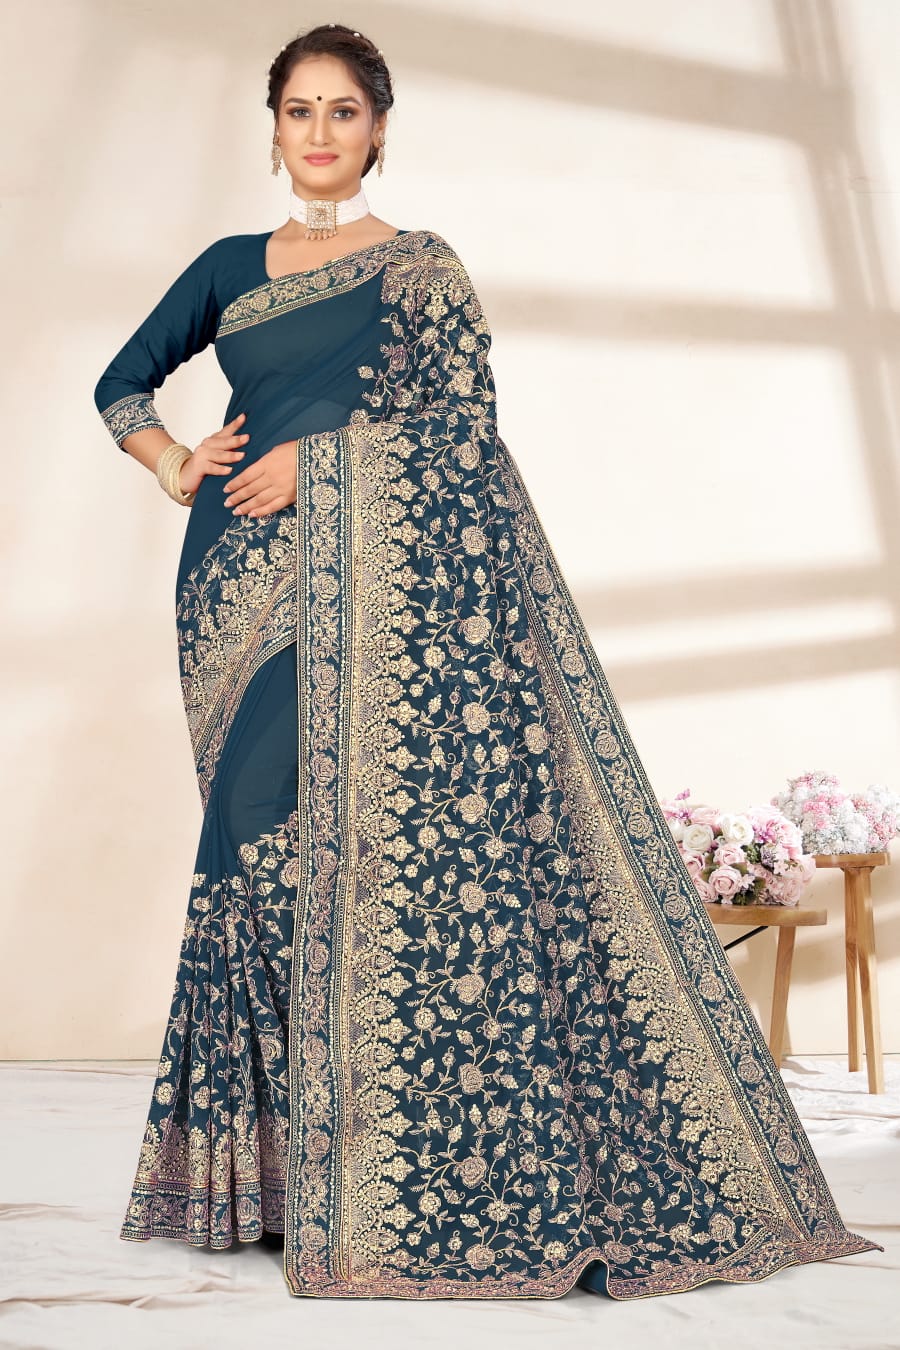 HEAVY DULHAN SAREE WITH JARI WORK ON ALL-OVER THE PALLU AND BORDER.